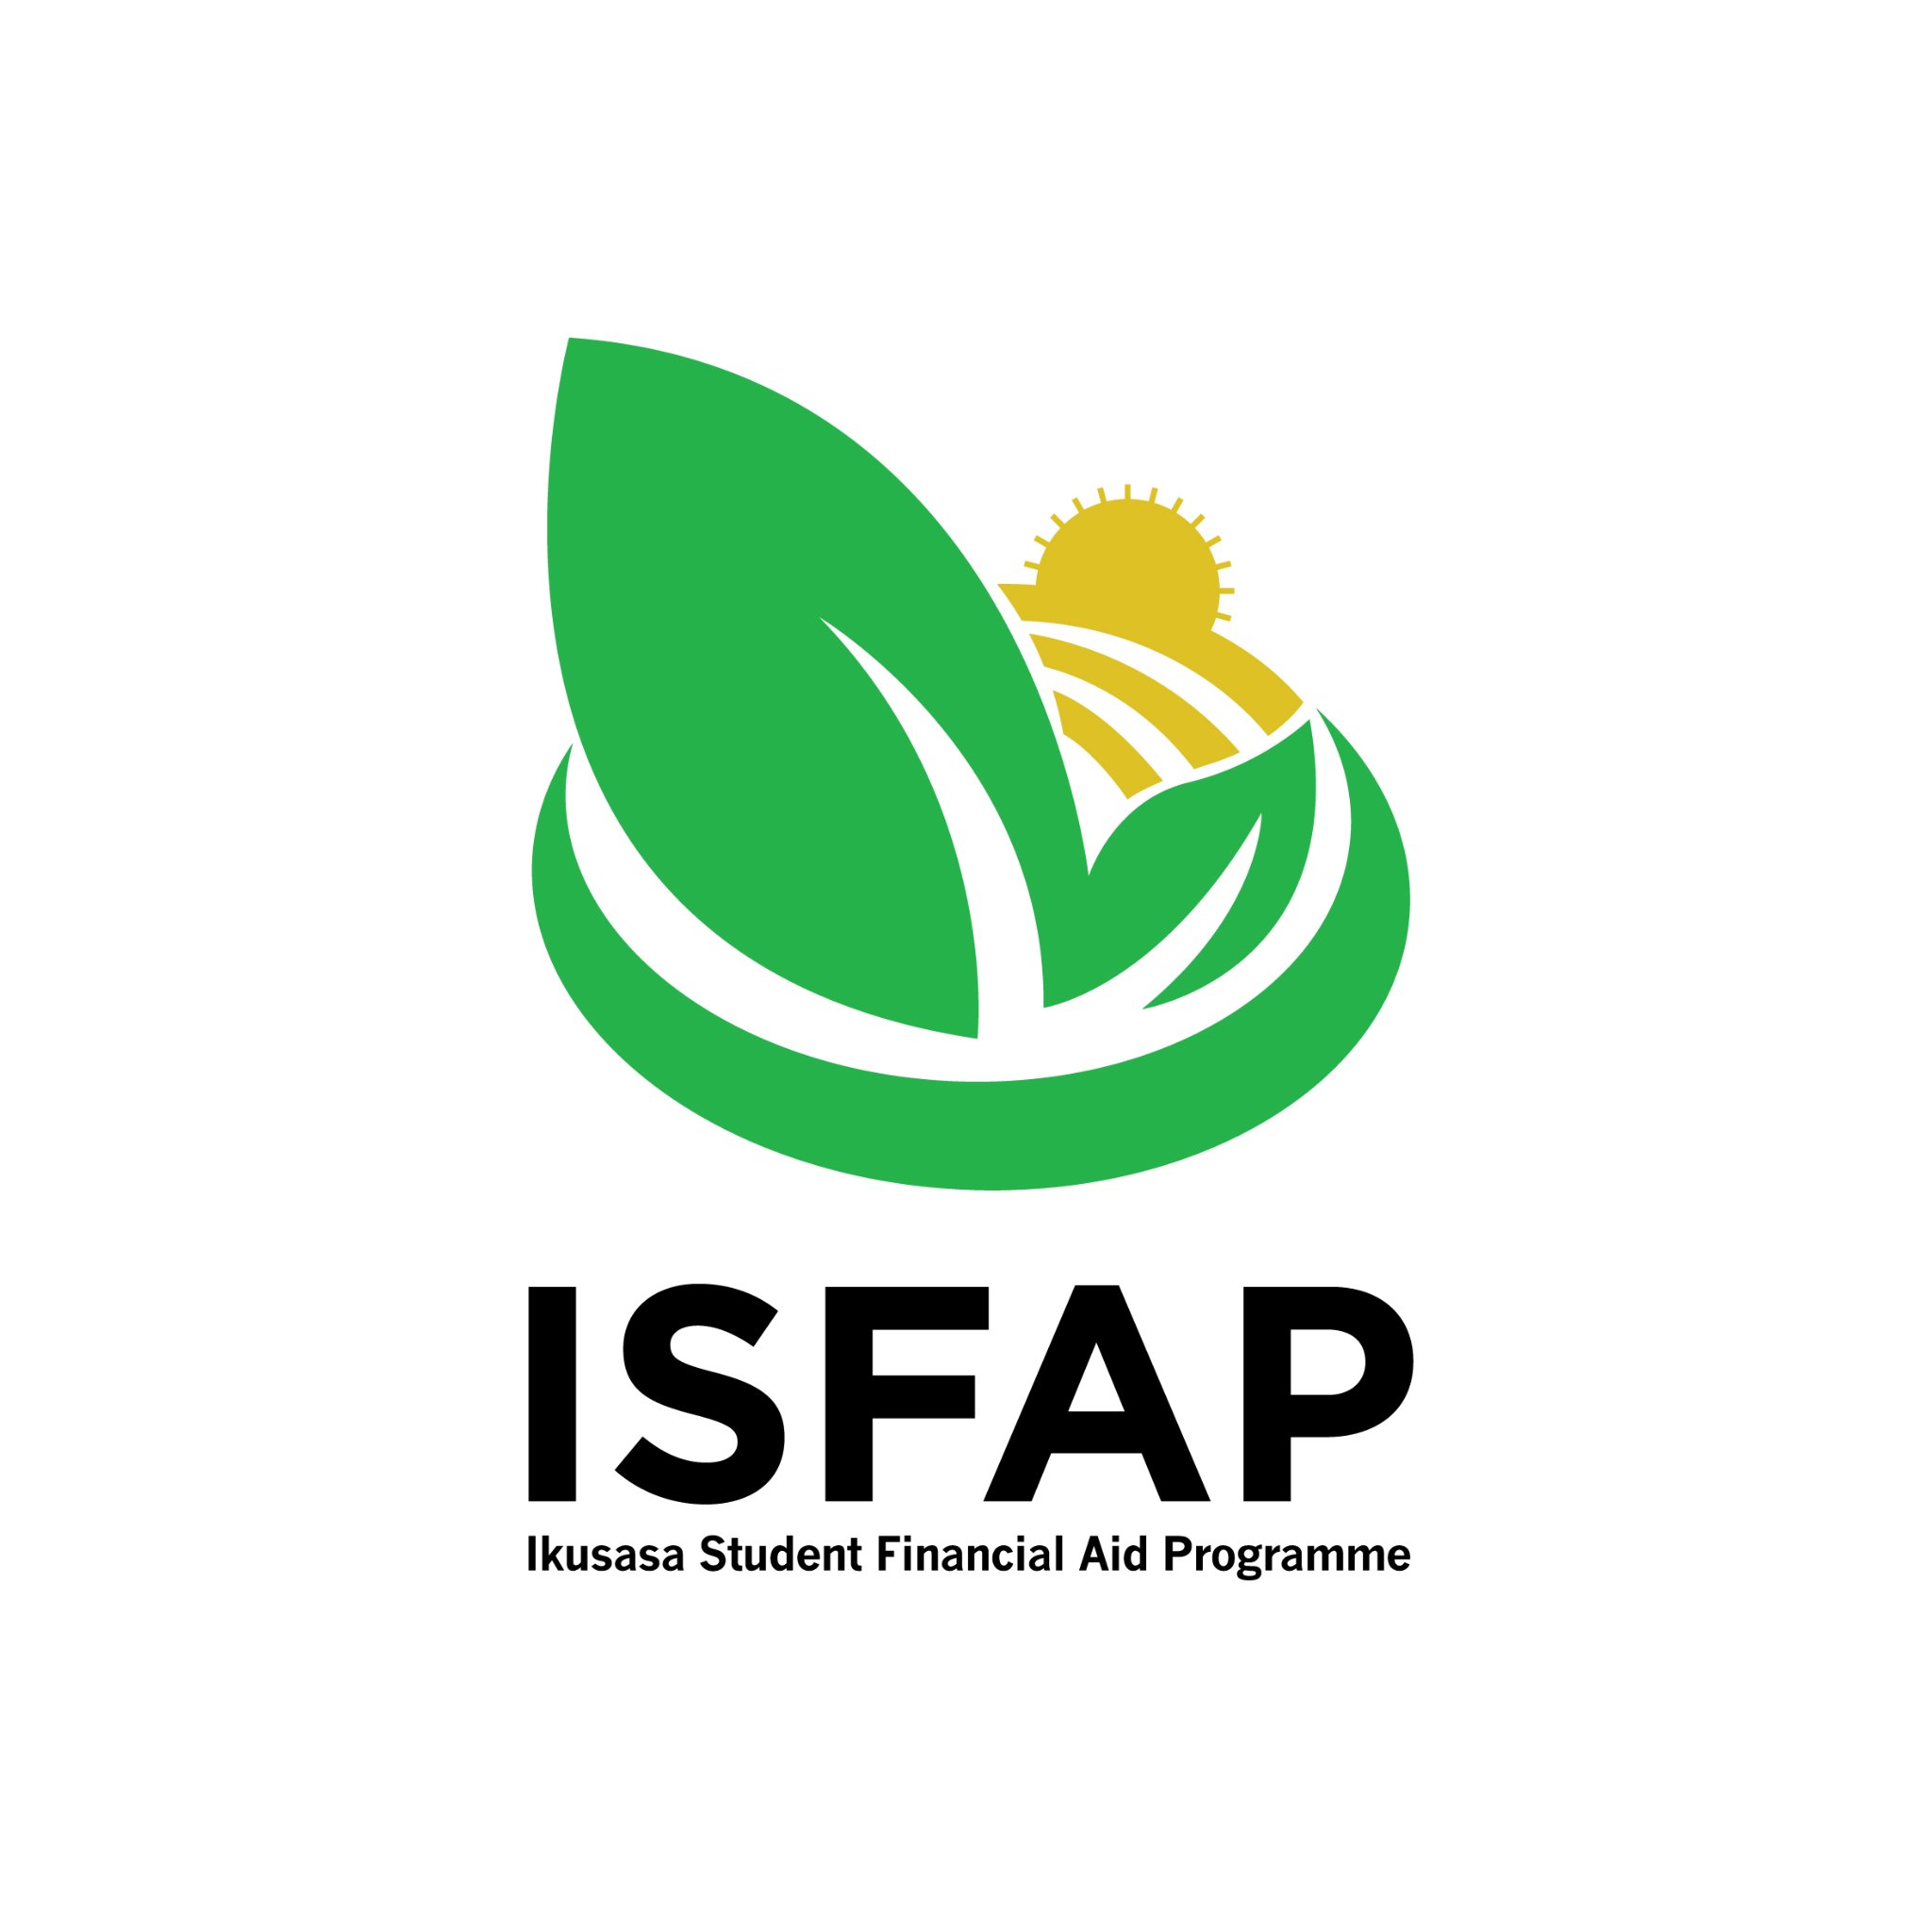 ISFAP is a NFP Foundation formed with the aim of providing a sustainable financial aid programme for #missingmiddle students at South African Universities